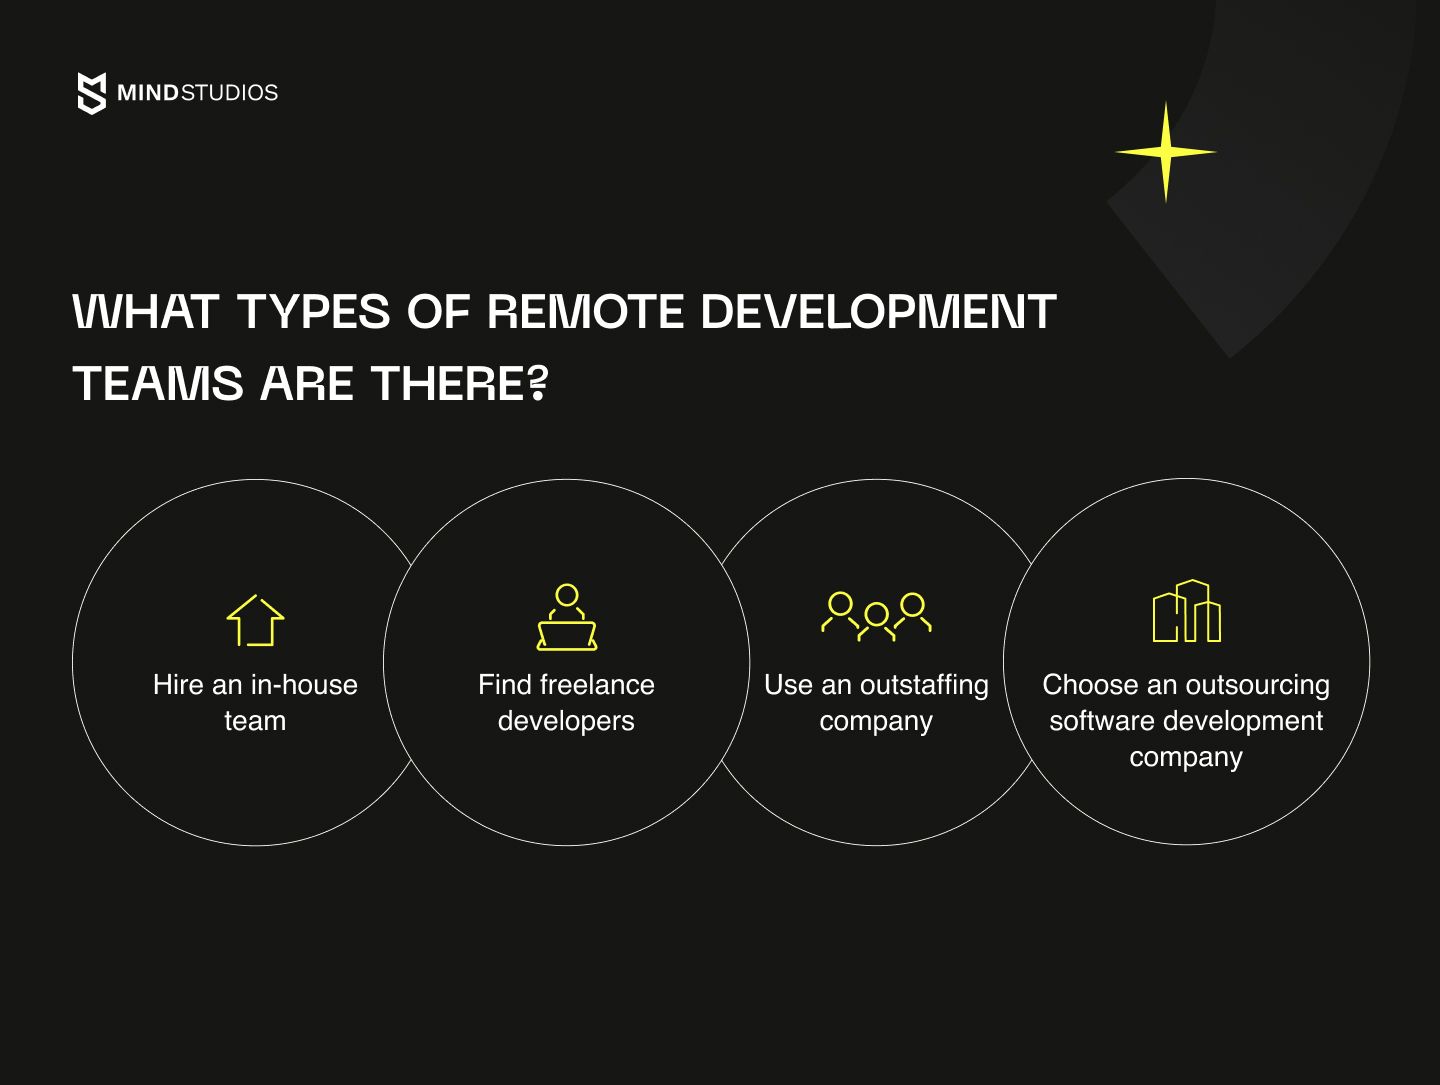 What types of remote development teams are there